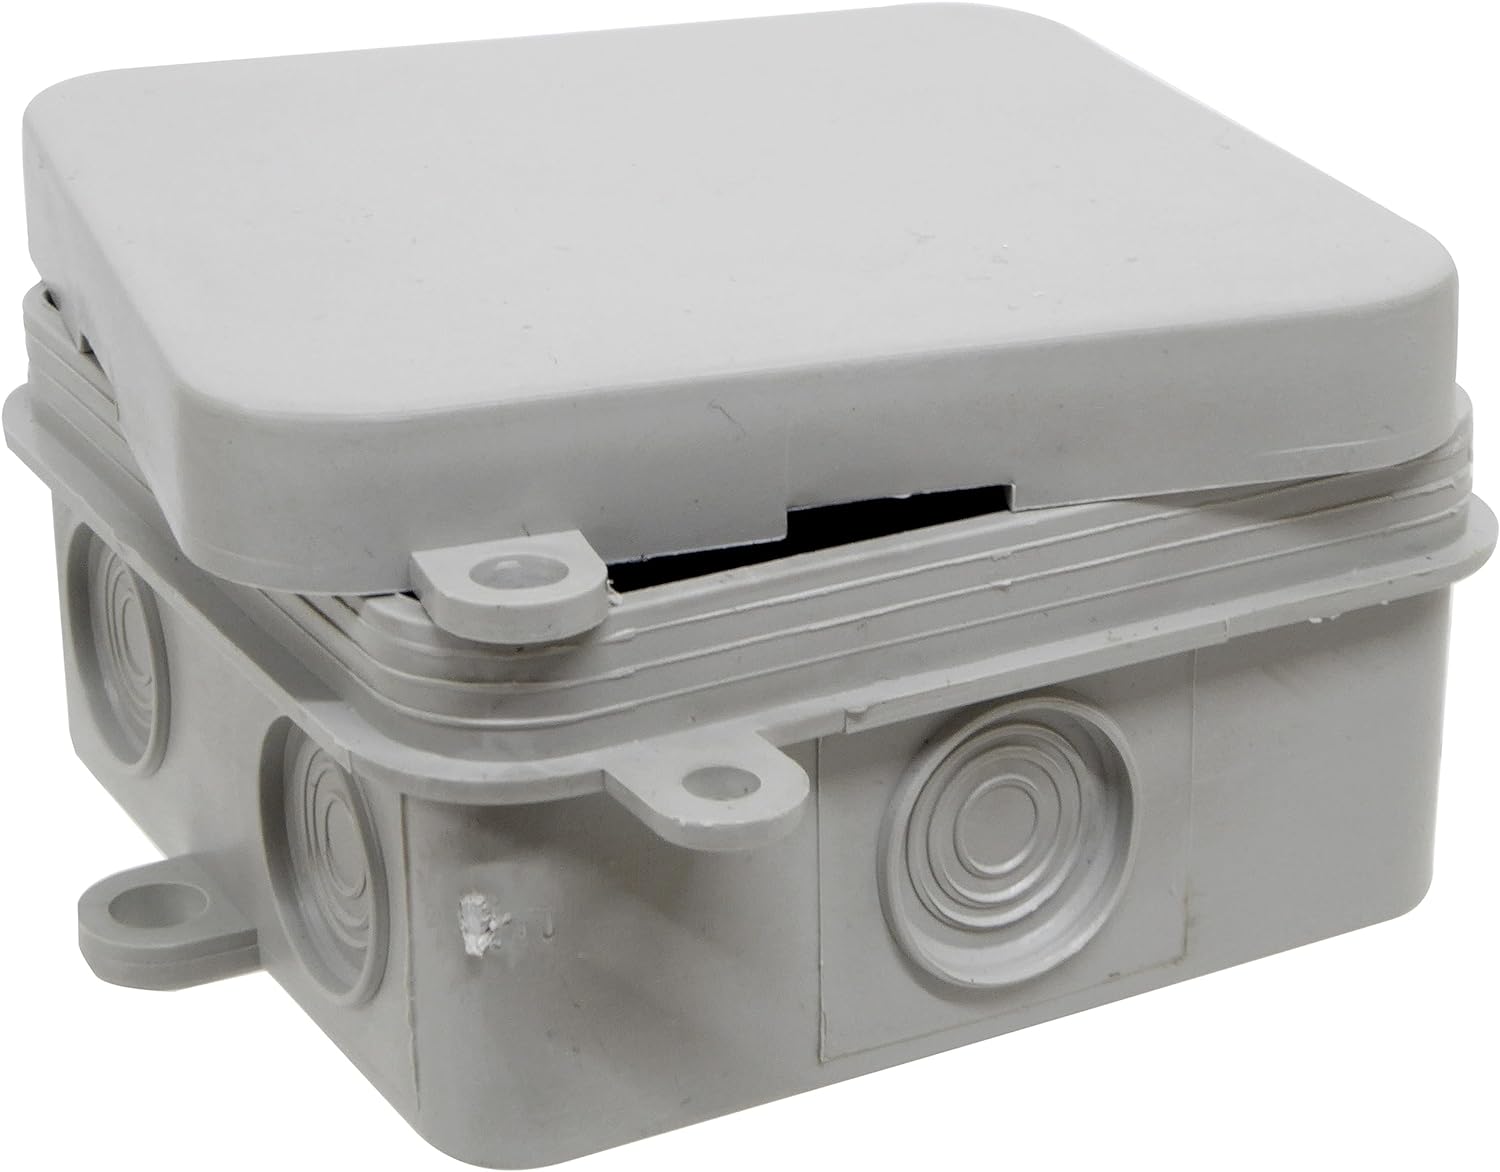 ESR JBC2 65mm x 65mm x 30mm IP44 Electrical Wiring Junction Box Waterproof Enclosure 15amp Terminal Connector Outdoor (Used with Floodlight Installation)